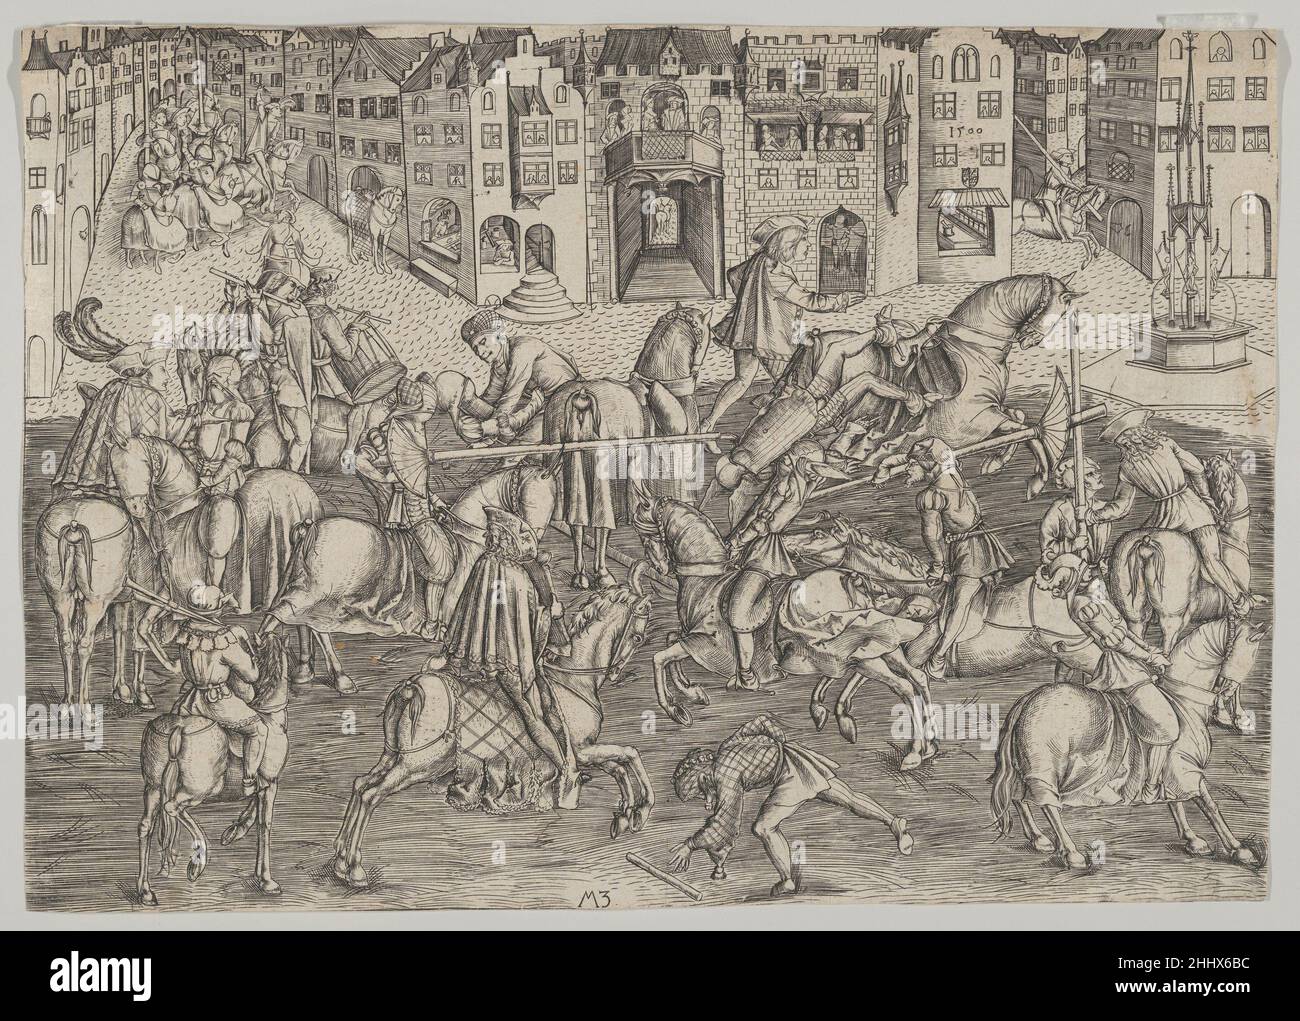 The Tournament 1500 Master MZ German This lively engraving is the earliest known print depicting a tournament. A small Bavarian coat of arms on the apothecary shop at right, below the inscribed date, suggests that the scene is set in Munich, the seat of the Bavarian court. The central figures on the balcony may be Duke Albrecht IV and his wife, Kunigunde of Austria. Charming details abound, such as the attendant straining to help a fallen knight to his feet and a spooked horse biting an unsuspecting knight from behind, sending his steed into a gallop. The identification of the engraver as the Stock Photo